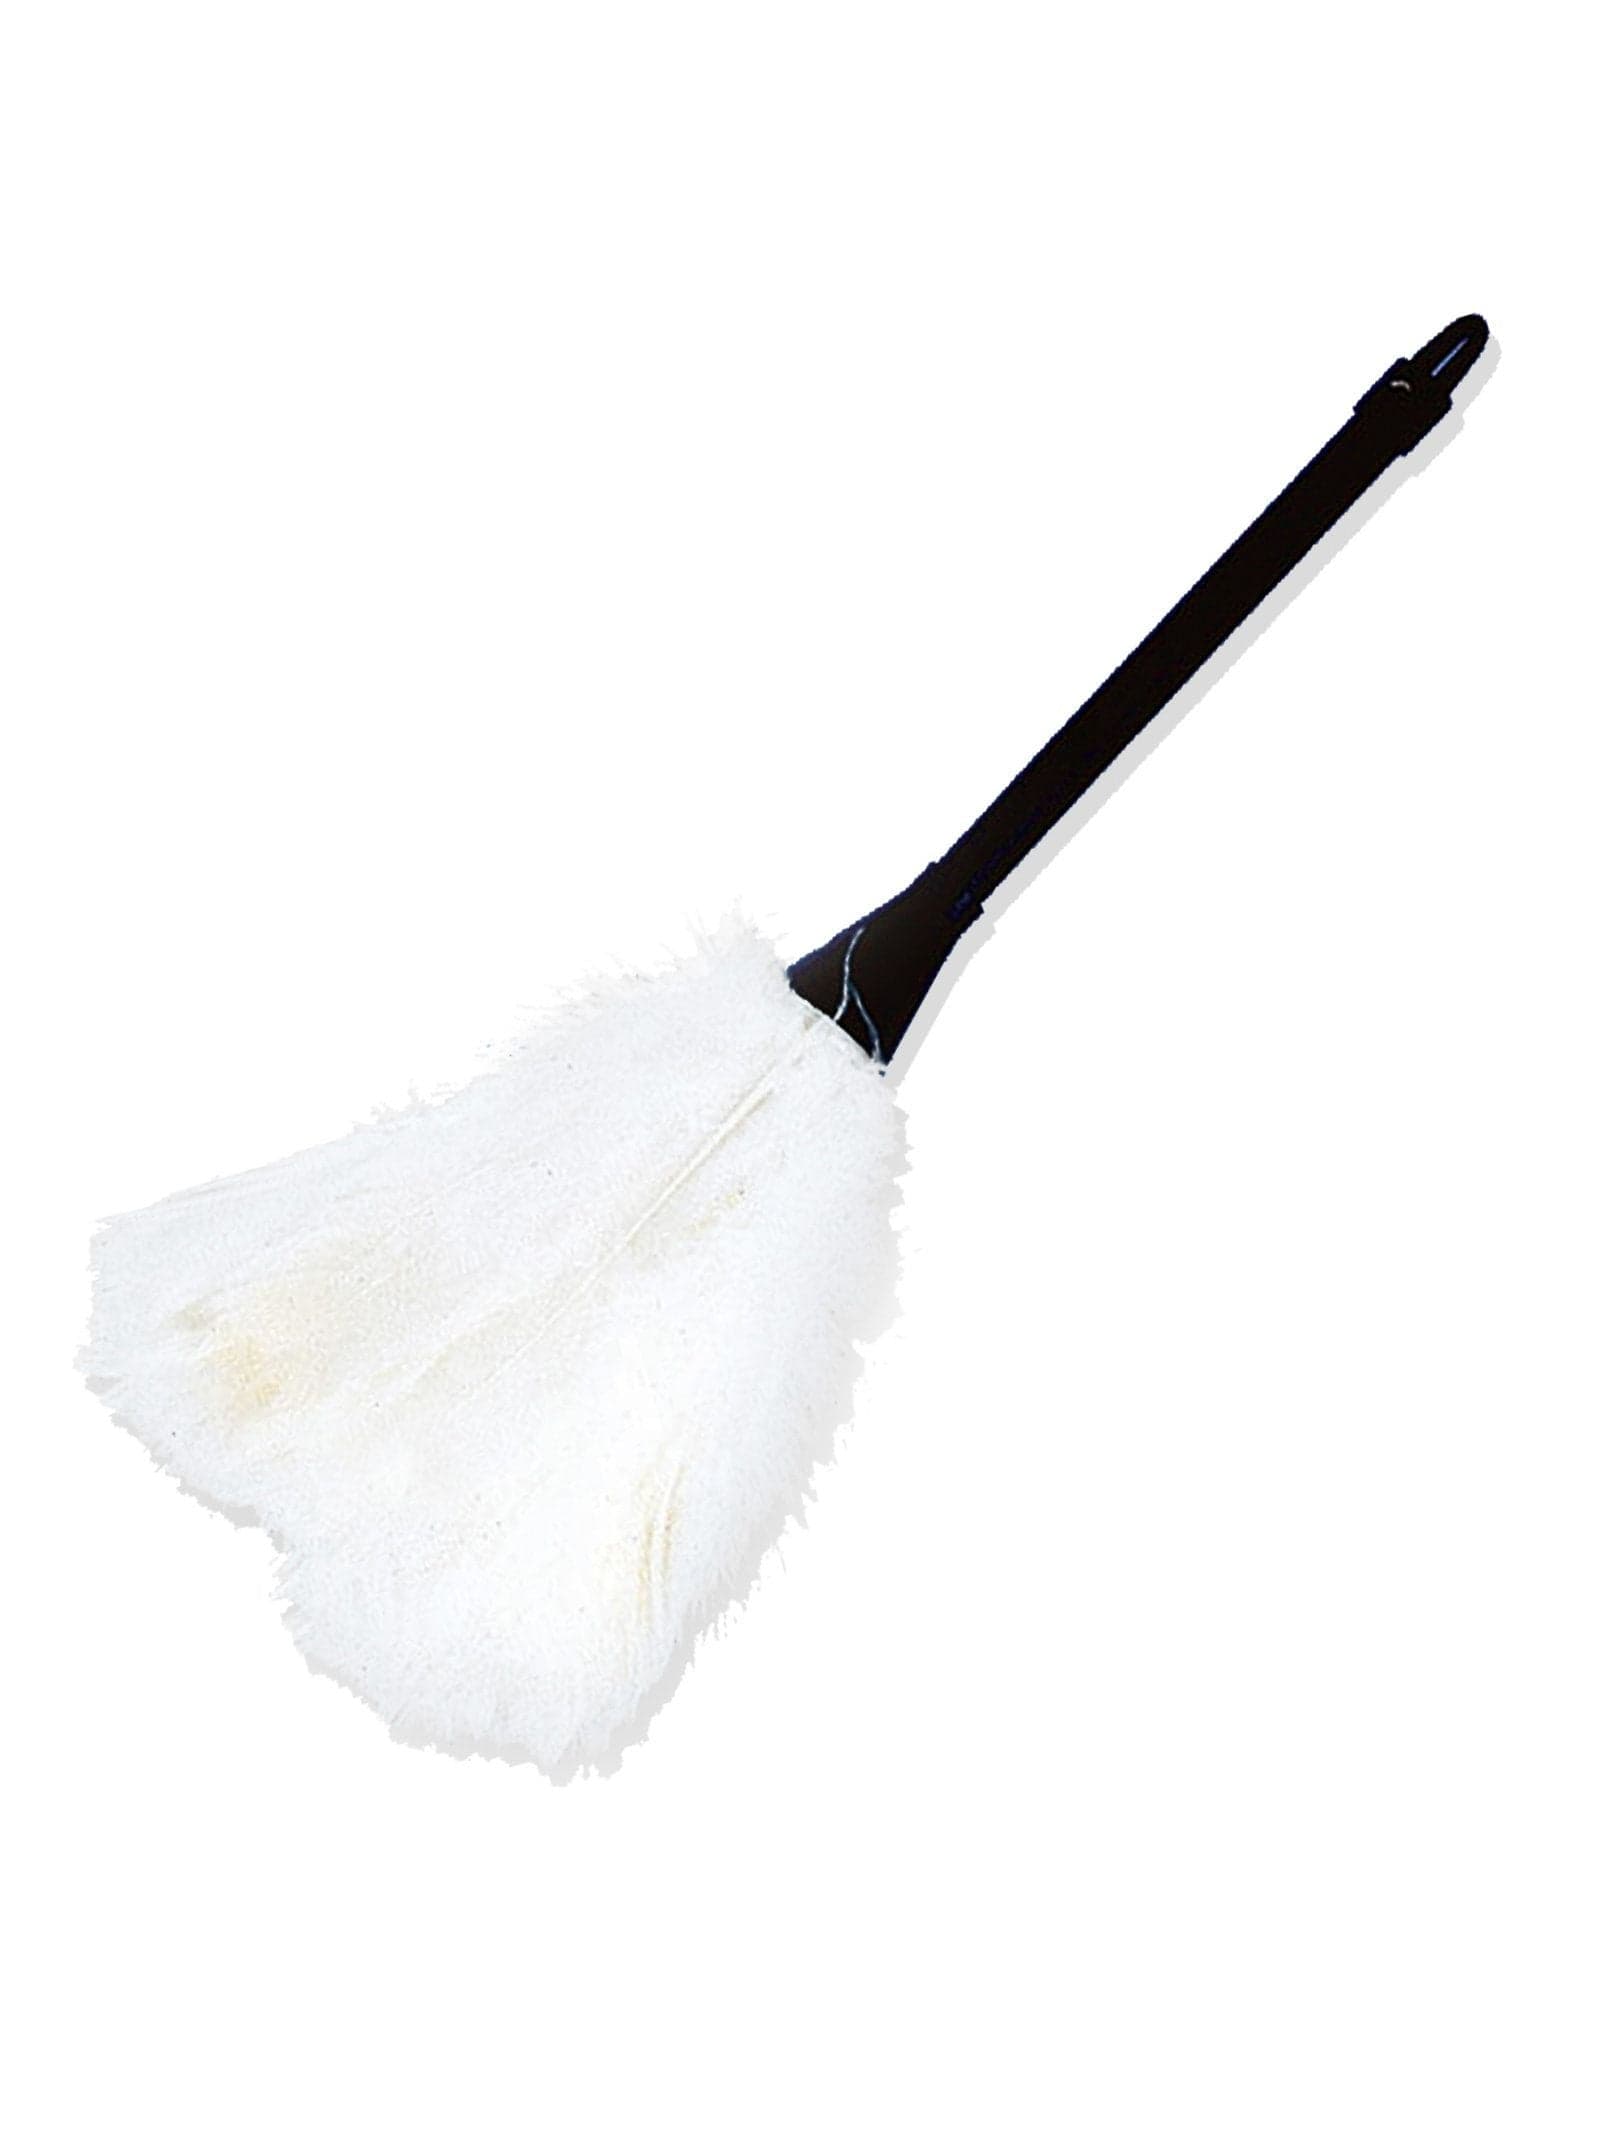 Adult Maid Feather Duster Prop - costumes.com